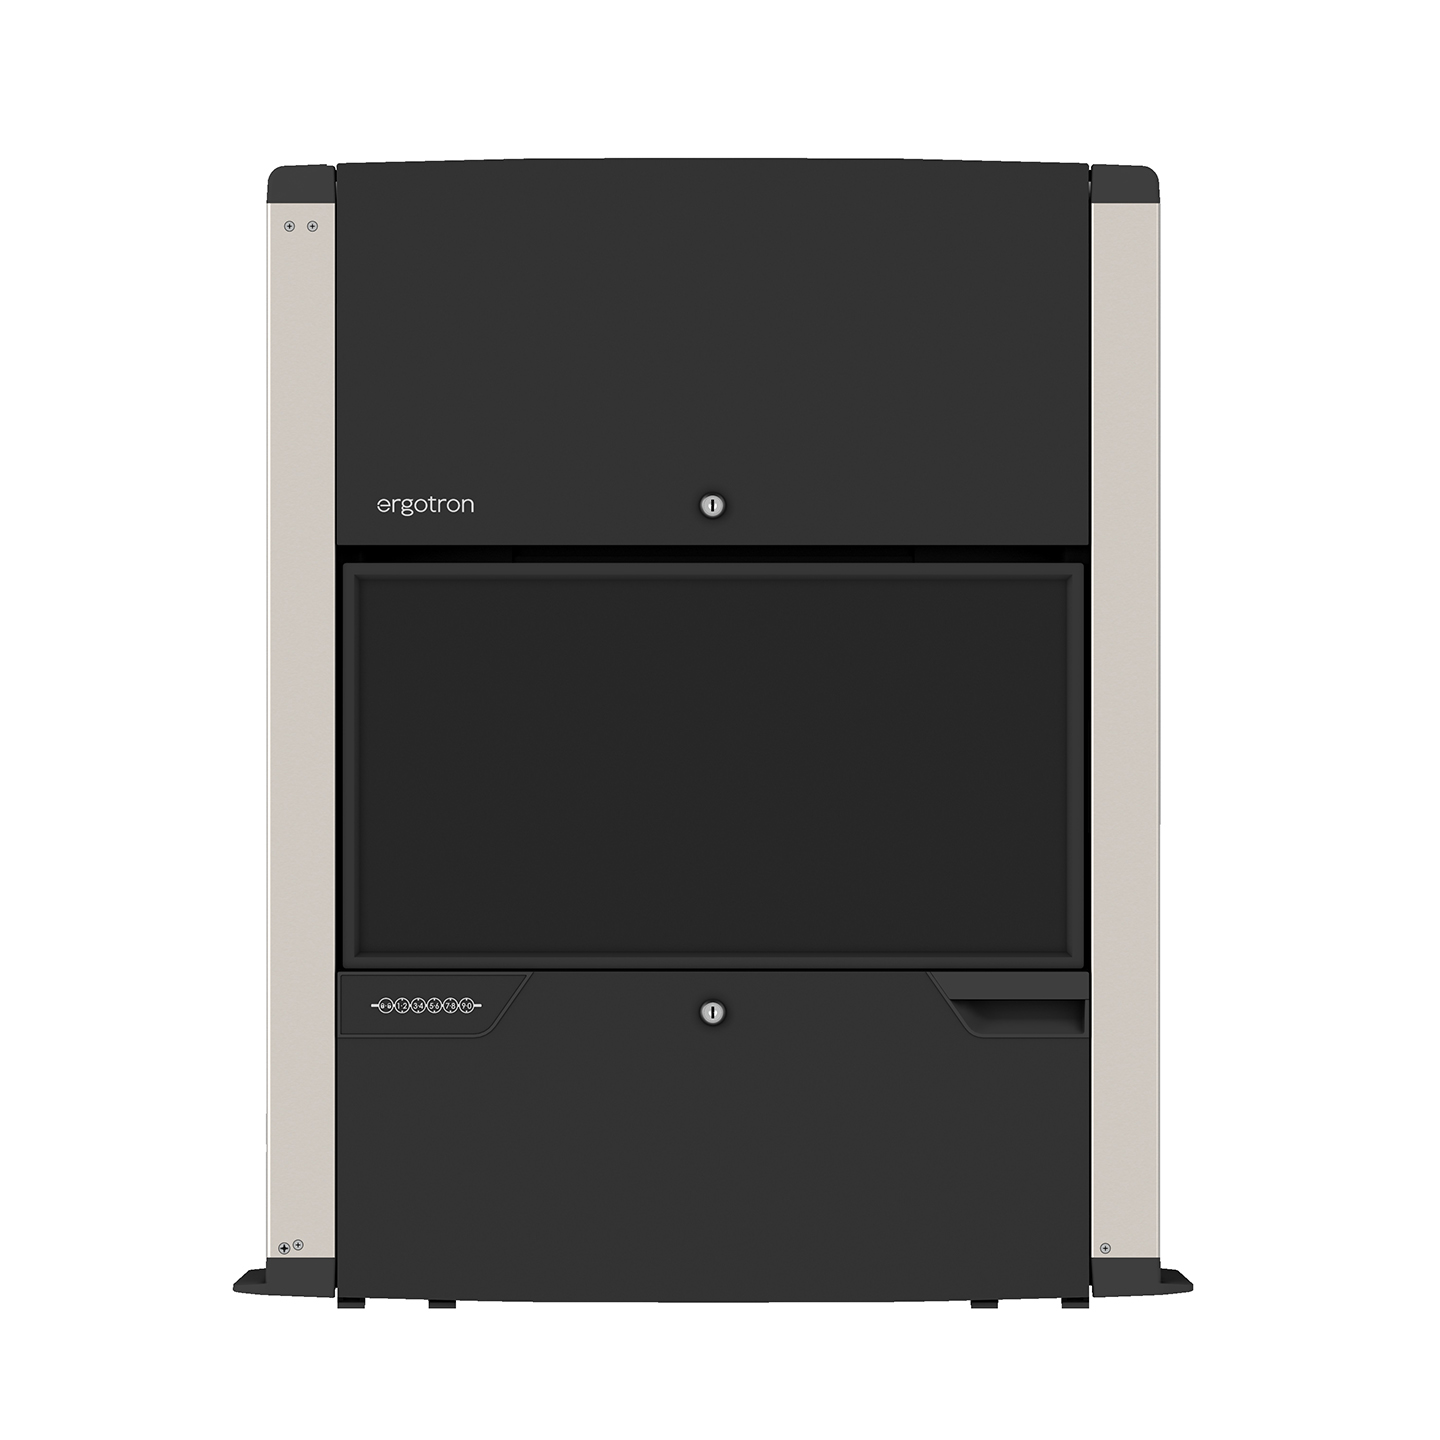 Haworth Carefit Enclosure Workspace at a front view in a black color